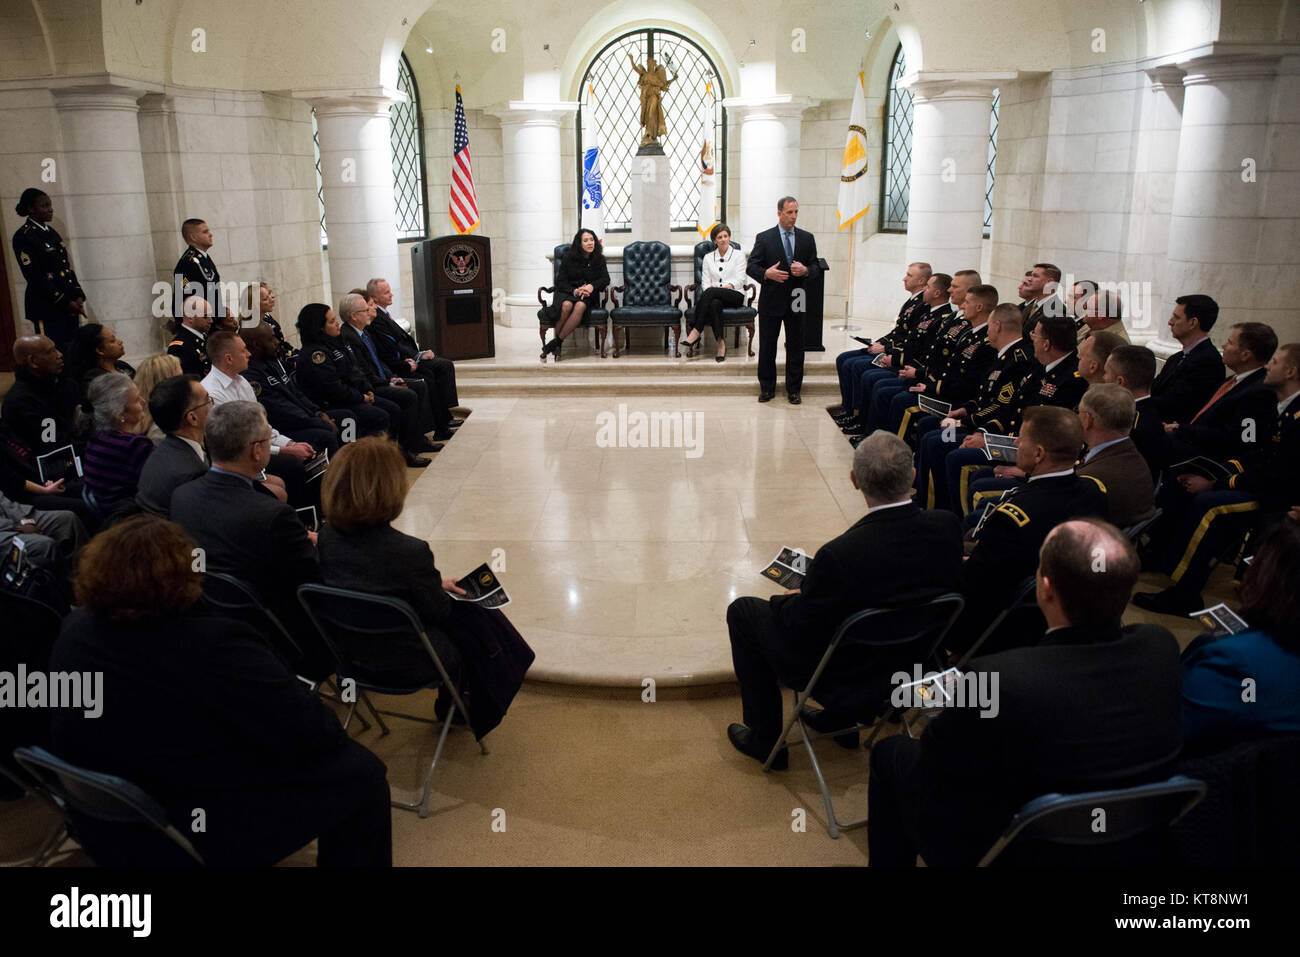 Gerald B. O’Keefe, administrative assistant to the Secretary of the Army, gives remarks during the Senior Executive Service induction ceremony for Katharine Kelley, superintendent, Arlington National Cemetery, March 2, 2017, in Arlington, Va. The ceremony took place in the lower level of the Memorial Amphitheater in the cemetery. (U.S. Army photo by Rachel Larue/Arlington National Cemetery/released) Stock Photo